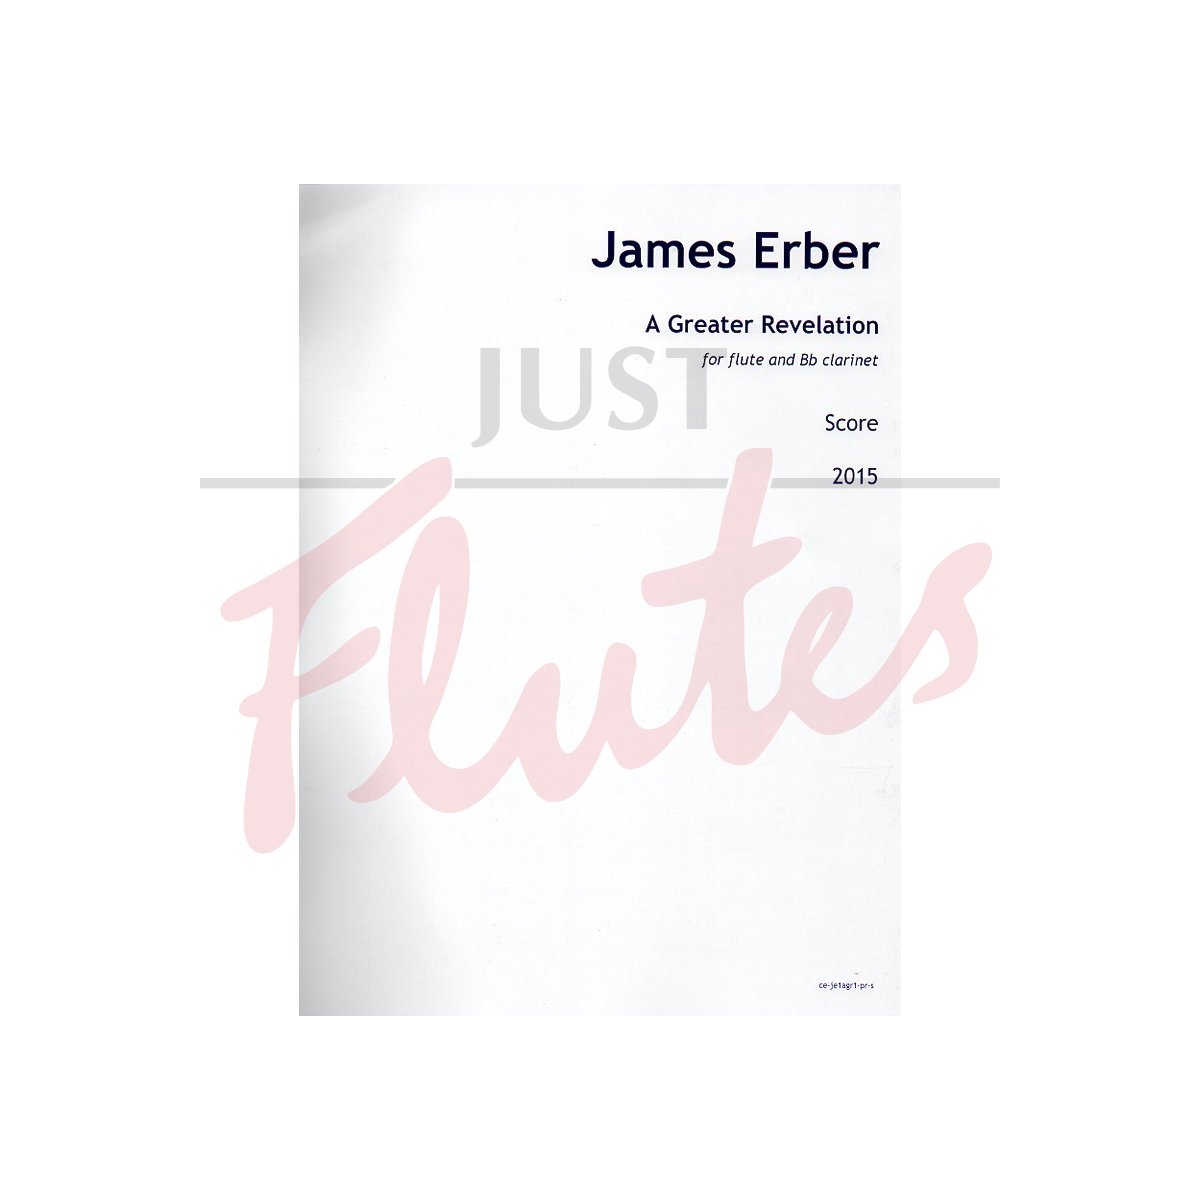 A Greater Revelation for Flute and B flat Clarinet